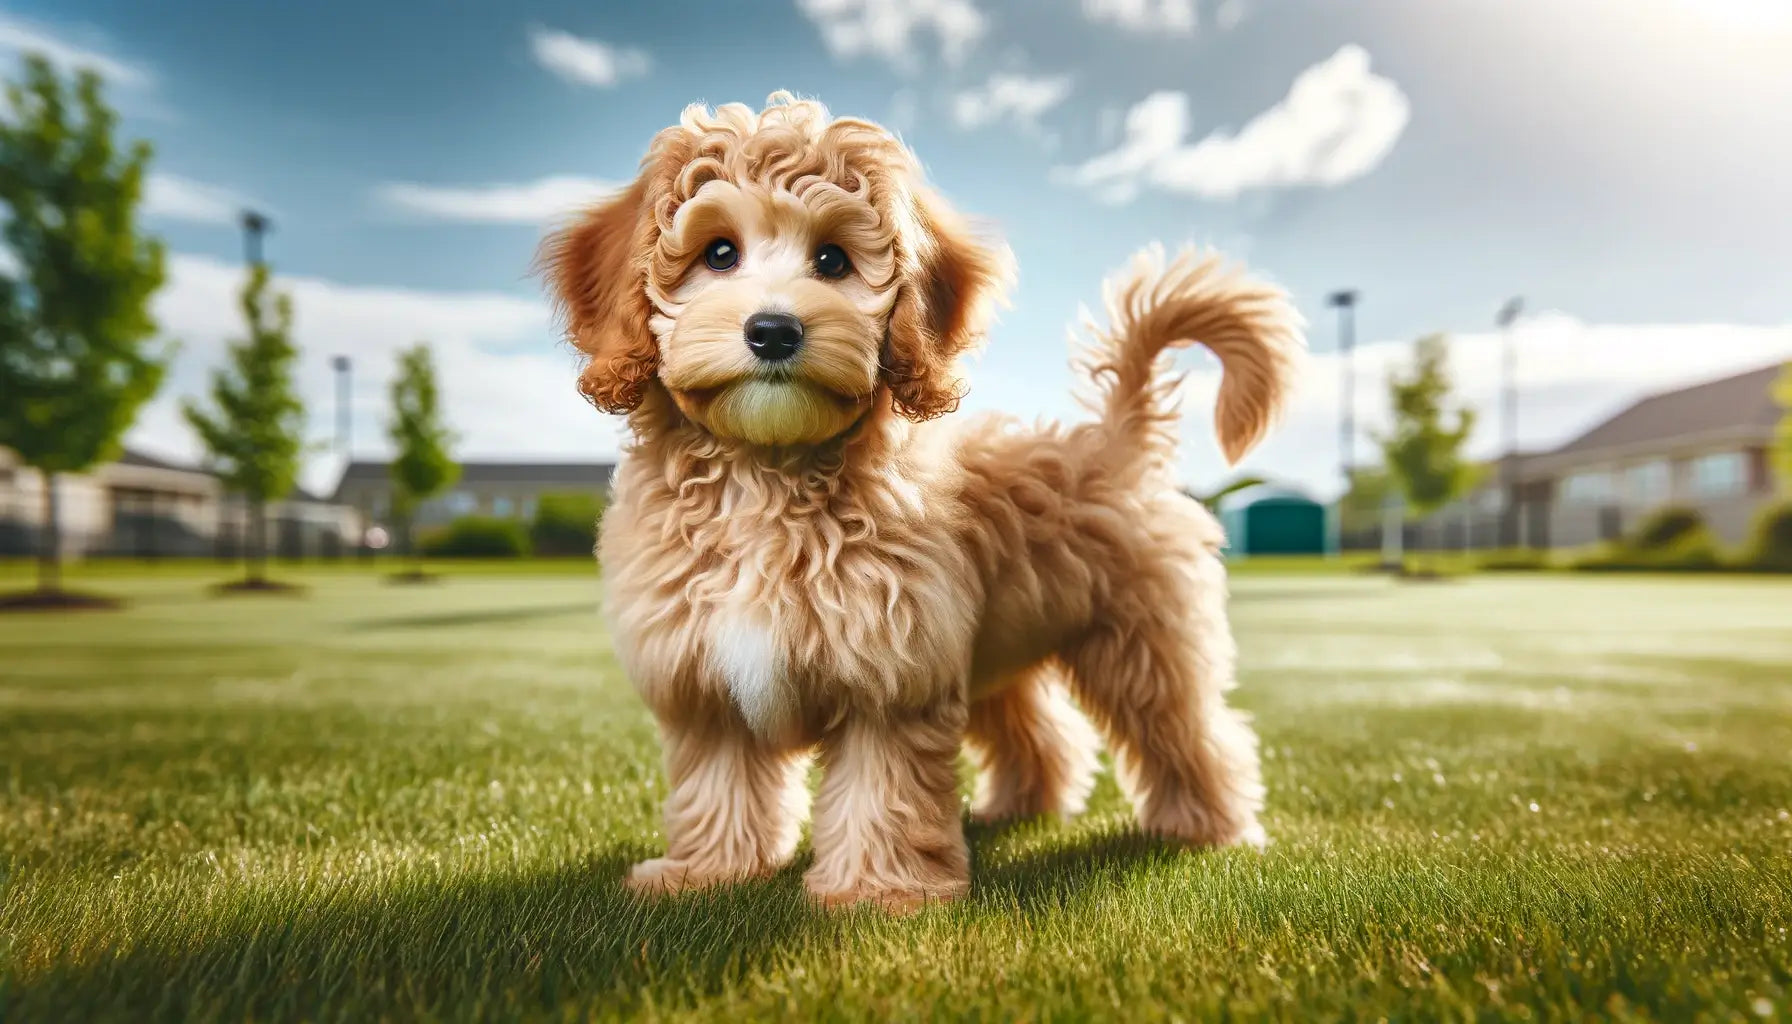 Teacup Goldendoodle stands on the grass, its small but robust build suggesting readiness for social events or outdoor activities.